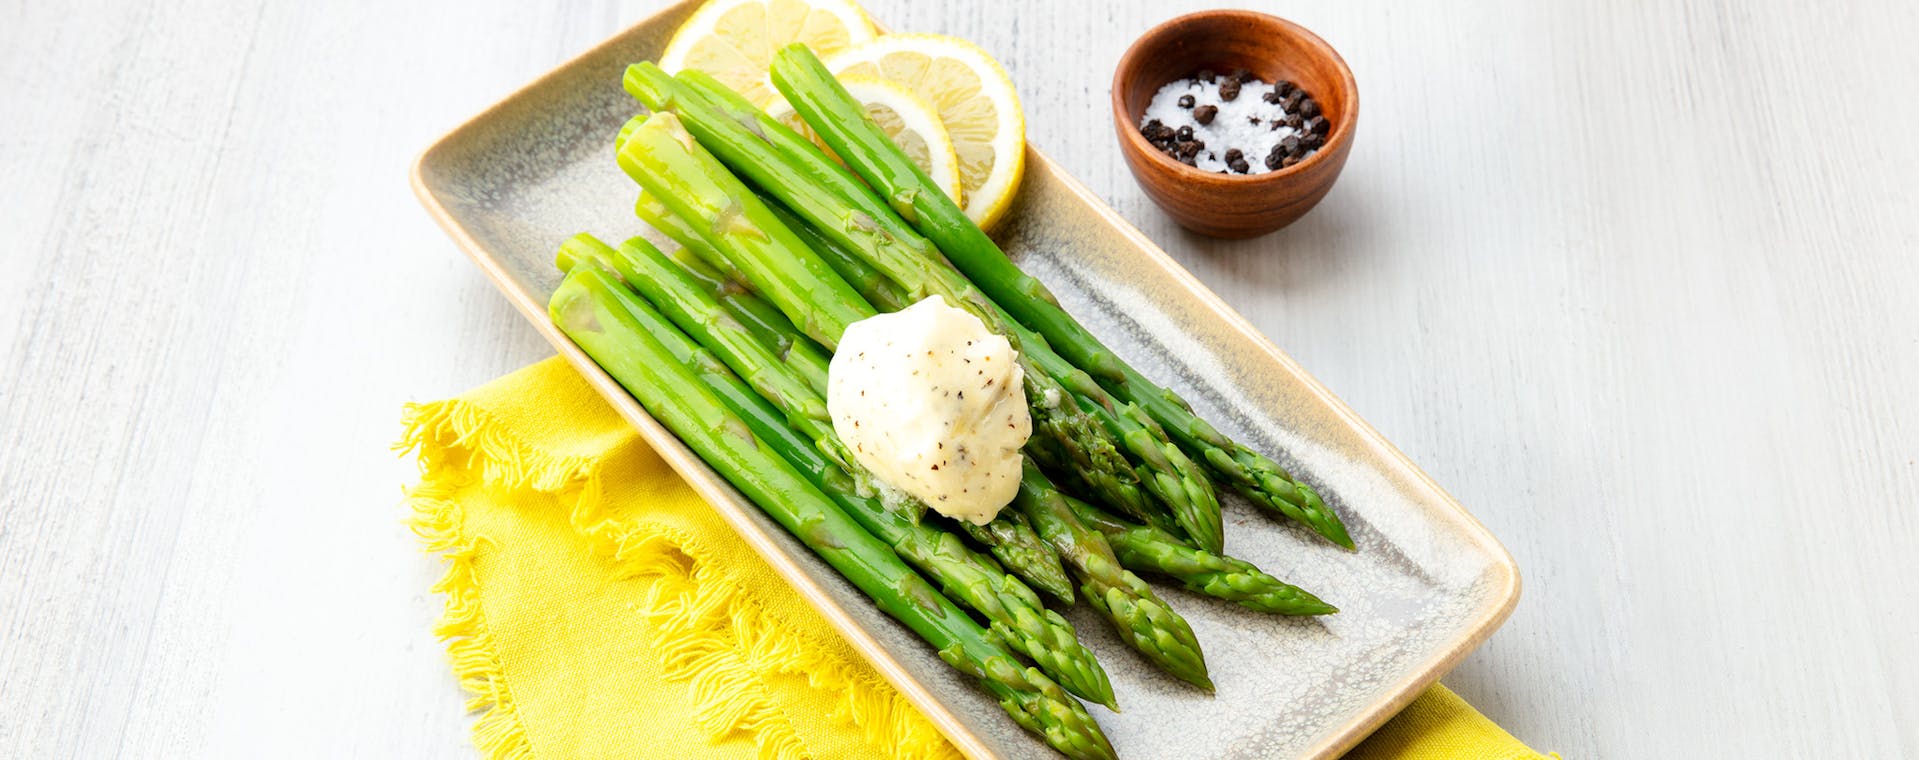 Asparagus topped with Sea Salt & Black Pepper flavored butter